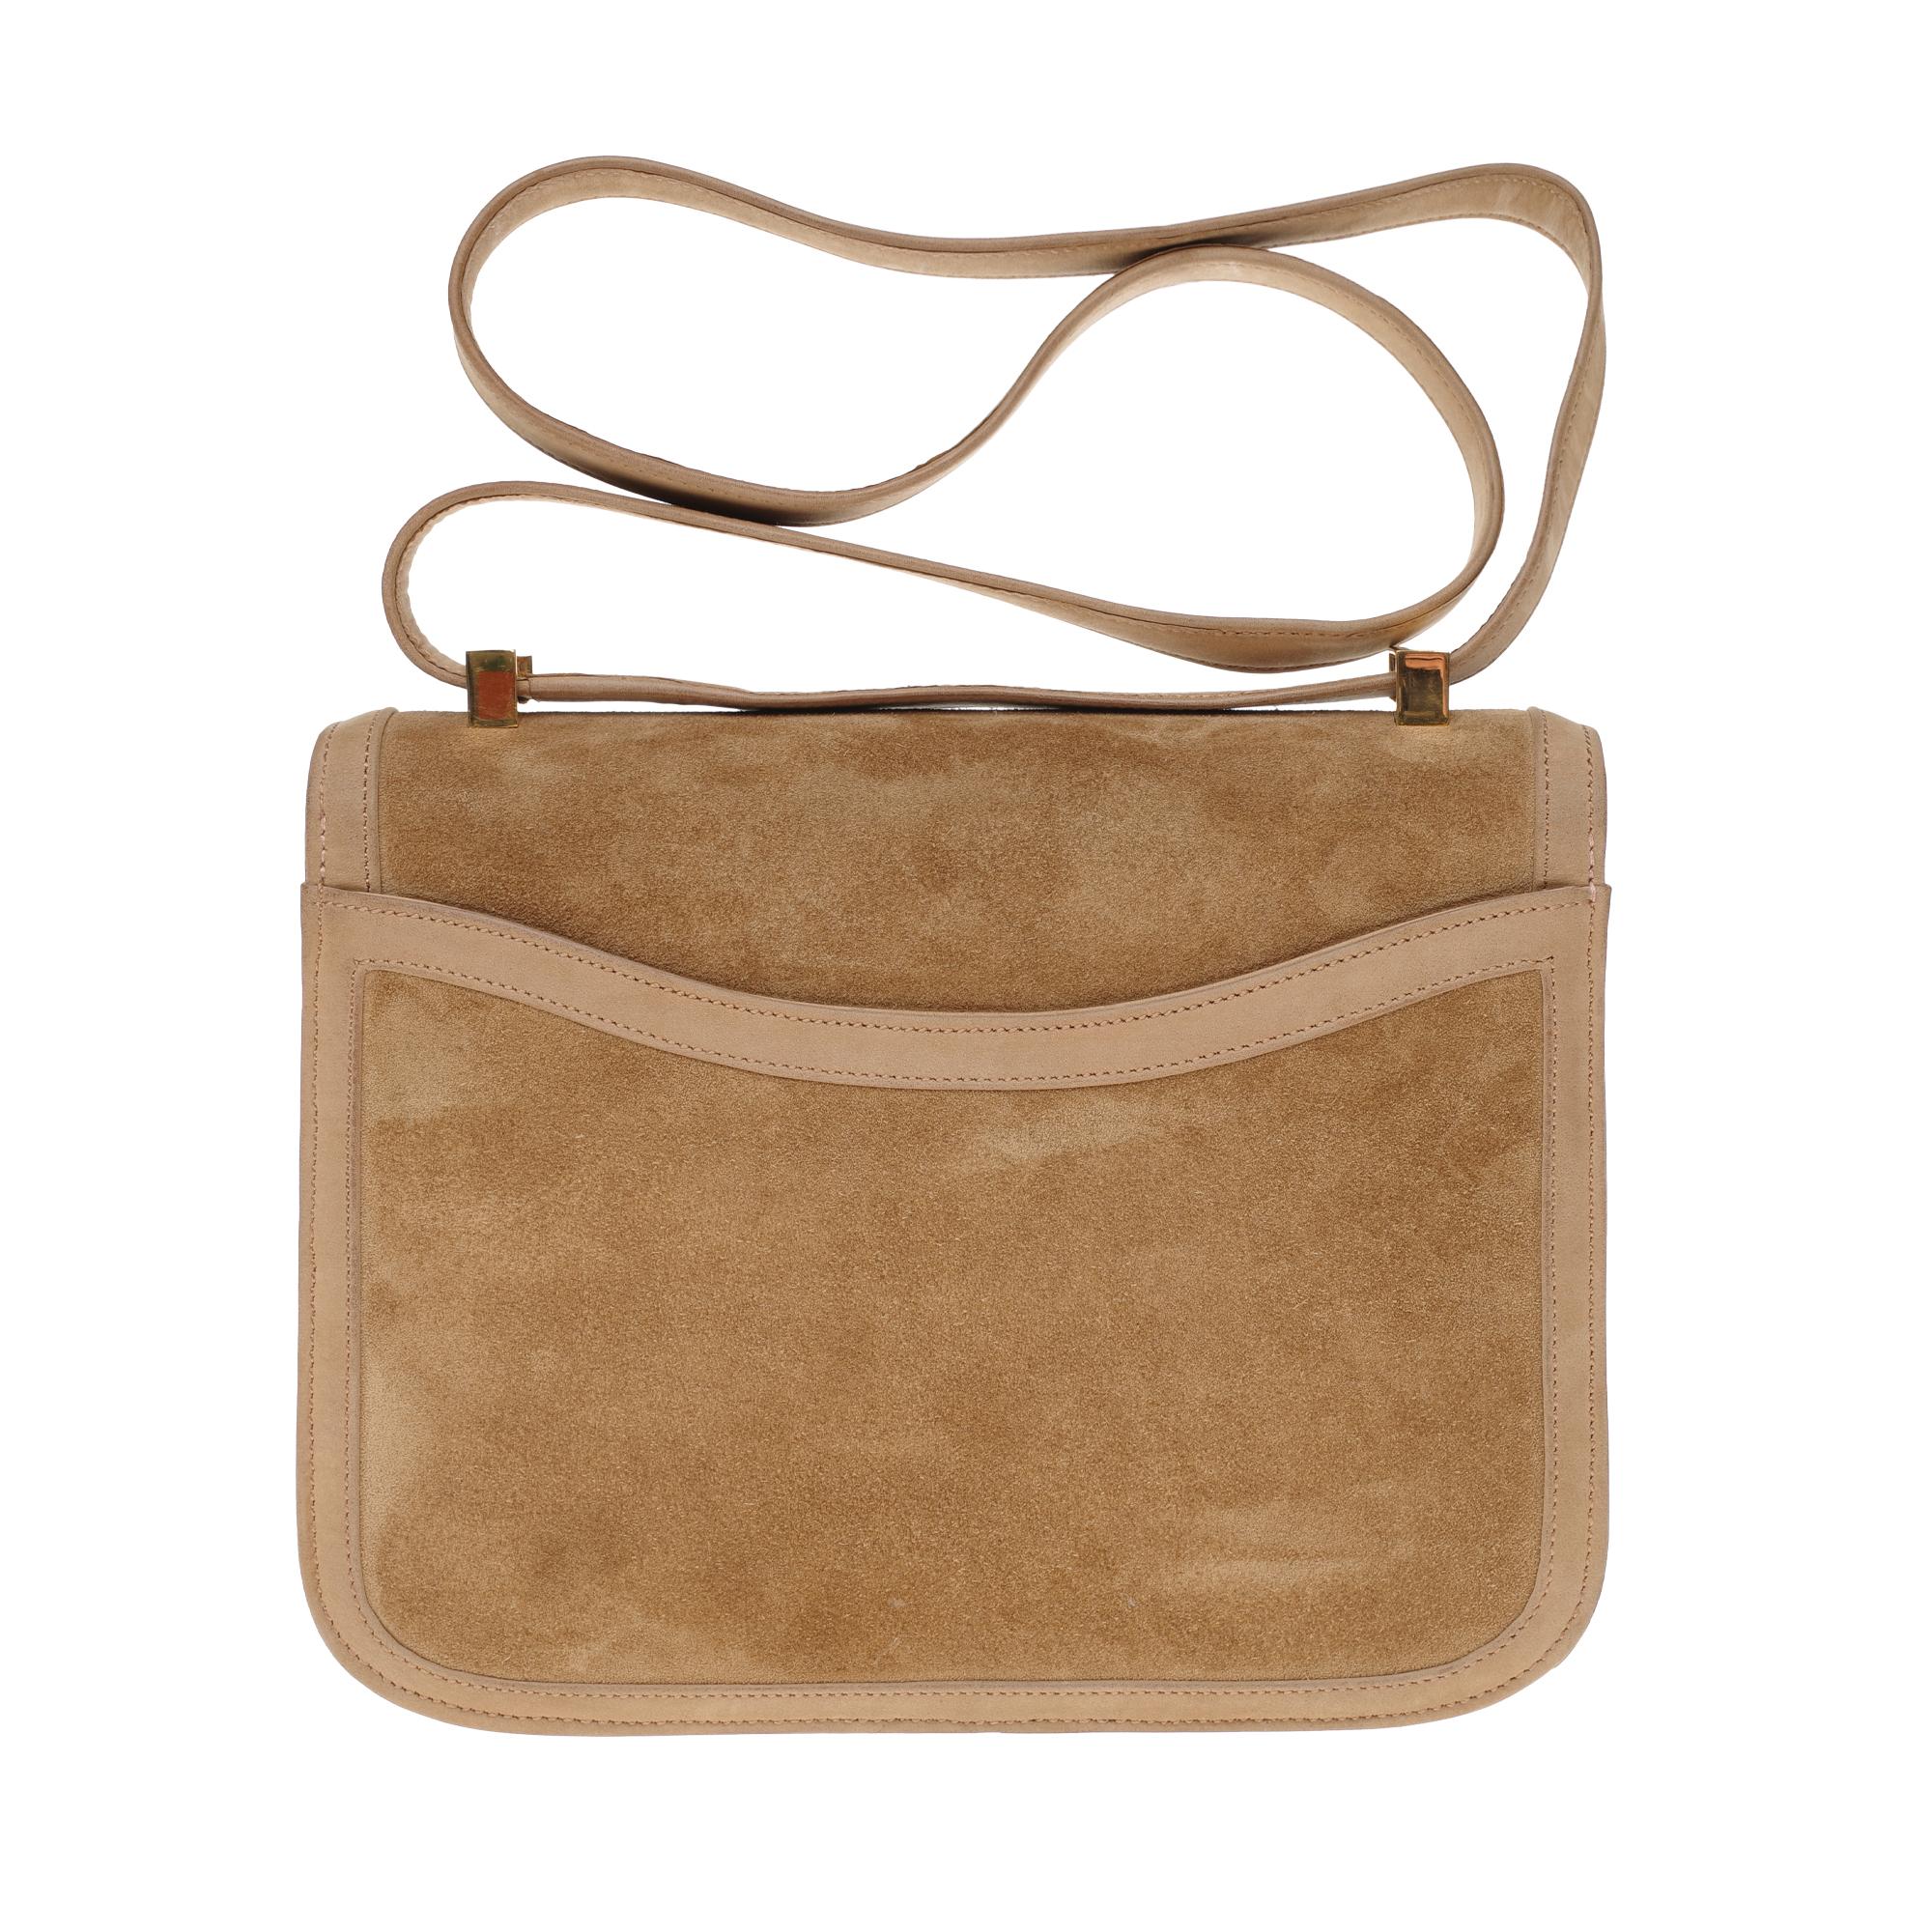 
COLLECTOR : Rare & Splendid Handbag Constance 23 cm Doblis in suede color sand and leather box clay, gold plated metal hardware, handle transformable into turned skin sand allowing a hand or shoulder carried.

H-shaped closure on flap.
A patch